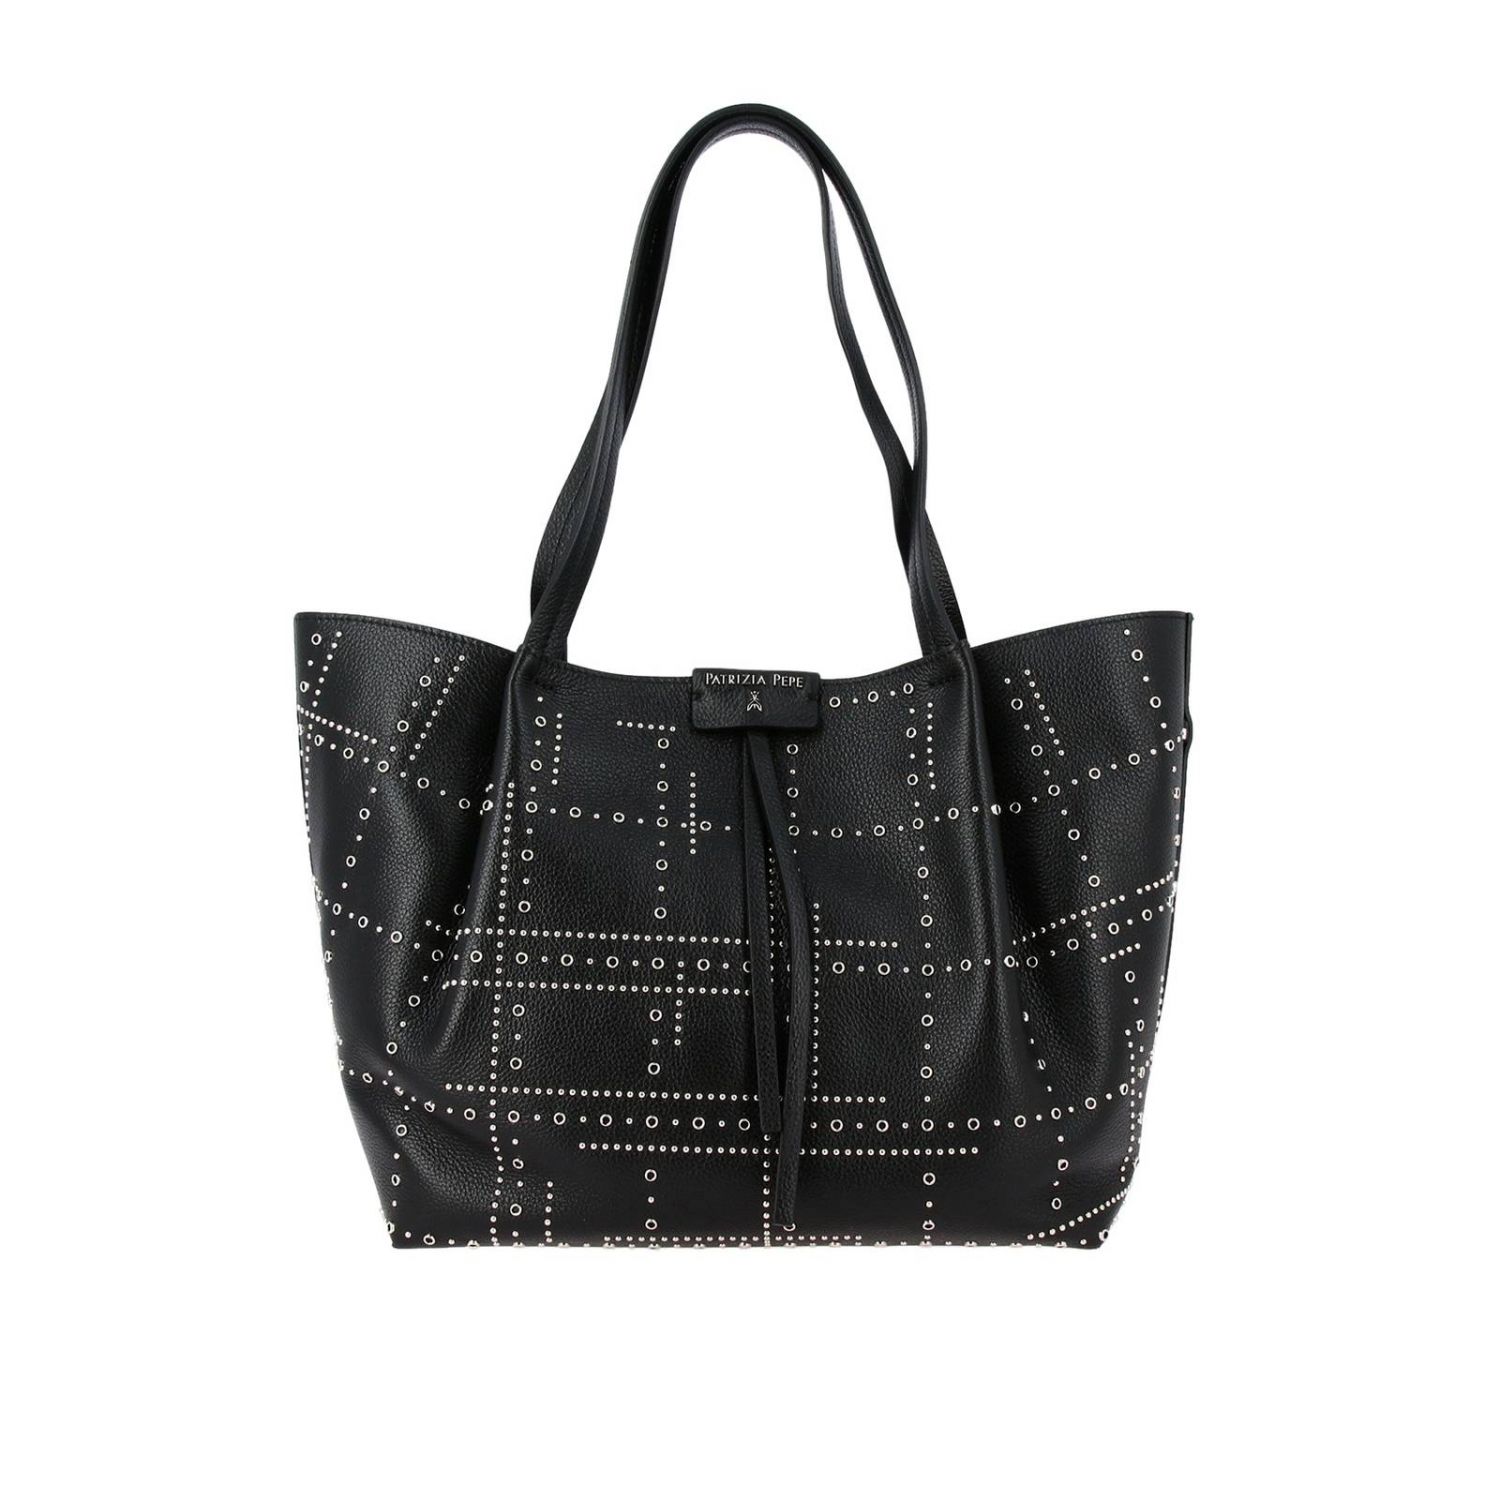 Patrizia Pepe Outlet: bag in hammered leather with micro studs - Black ...